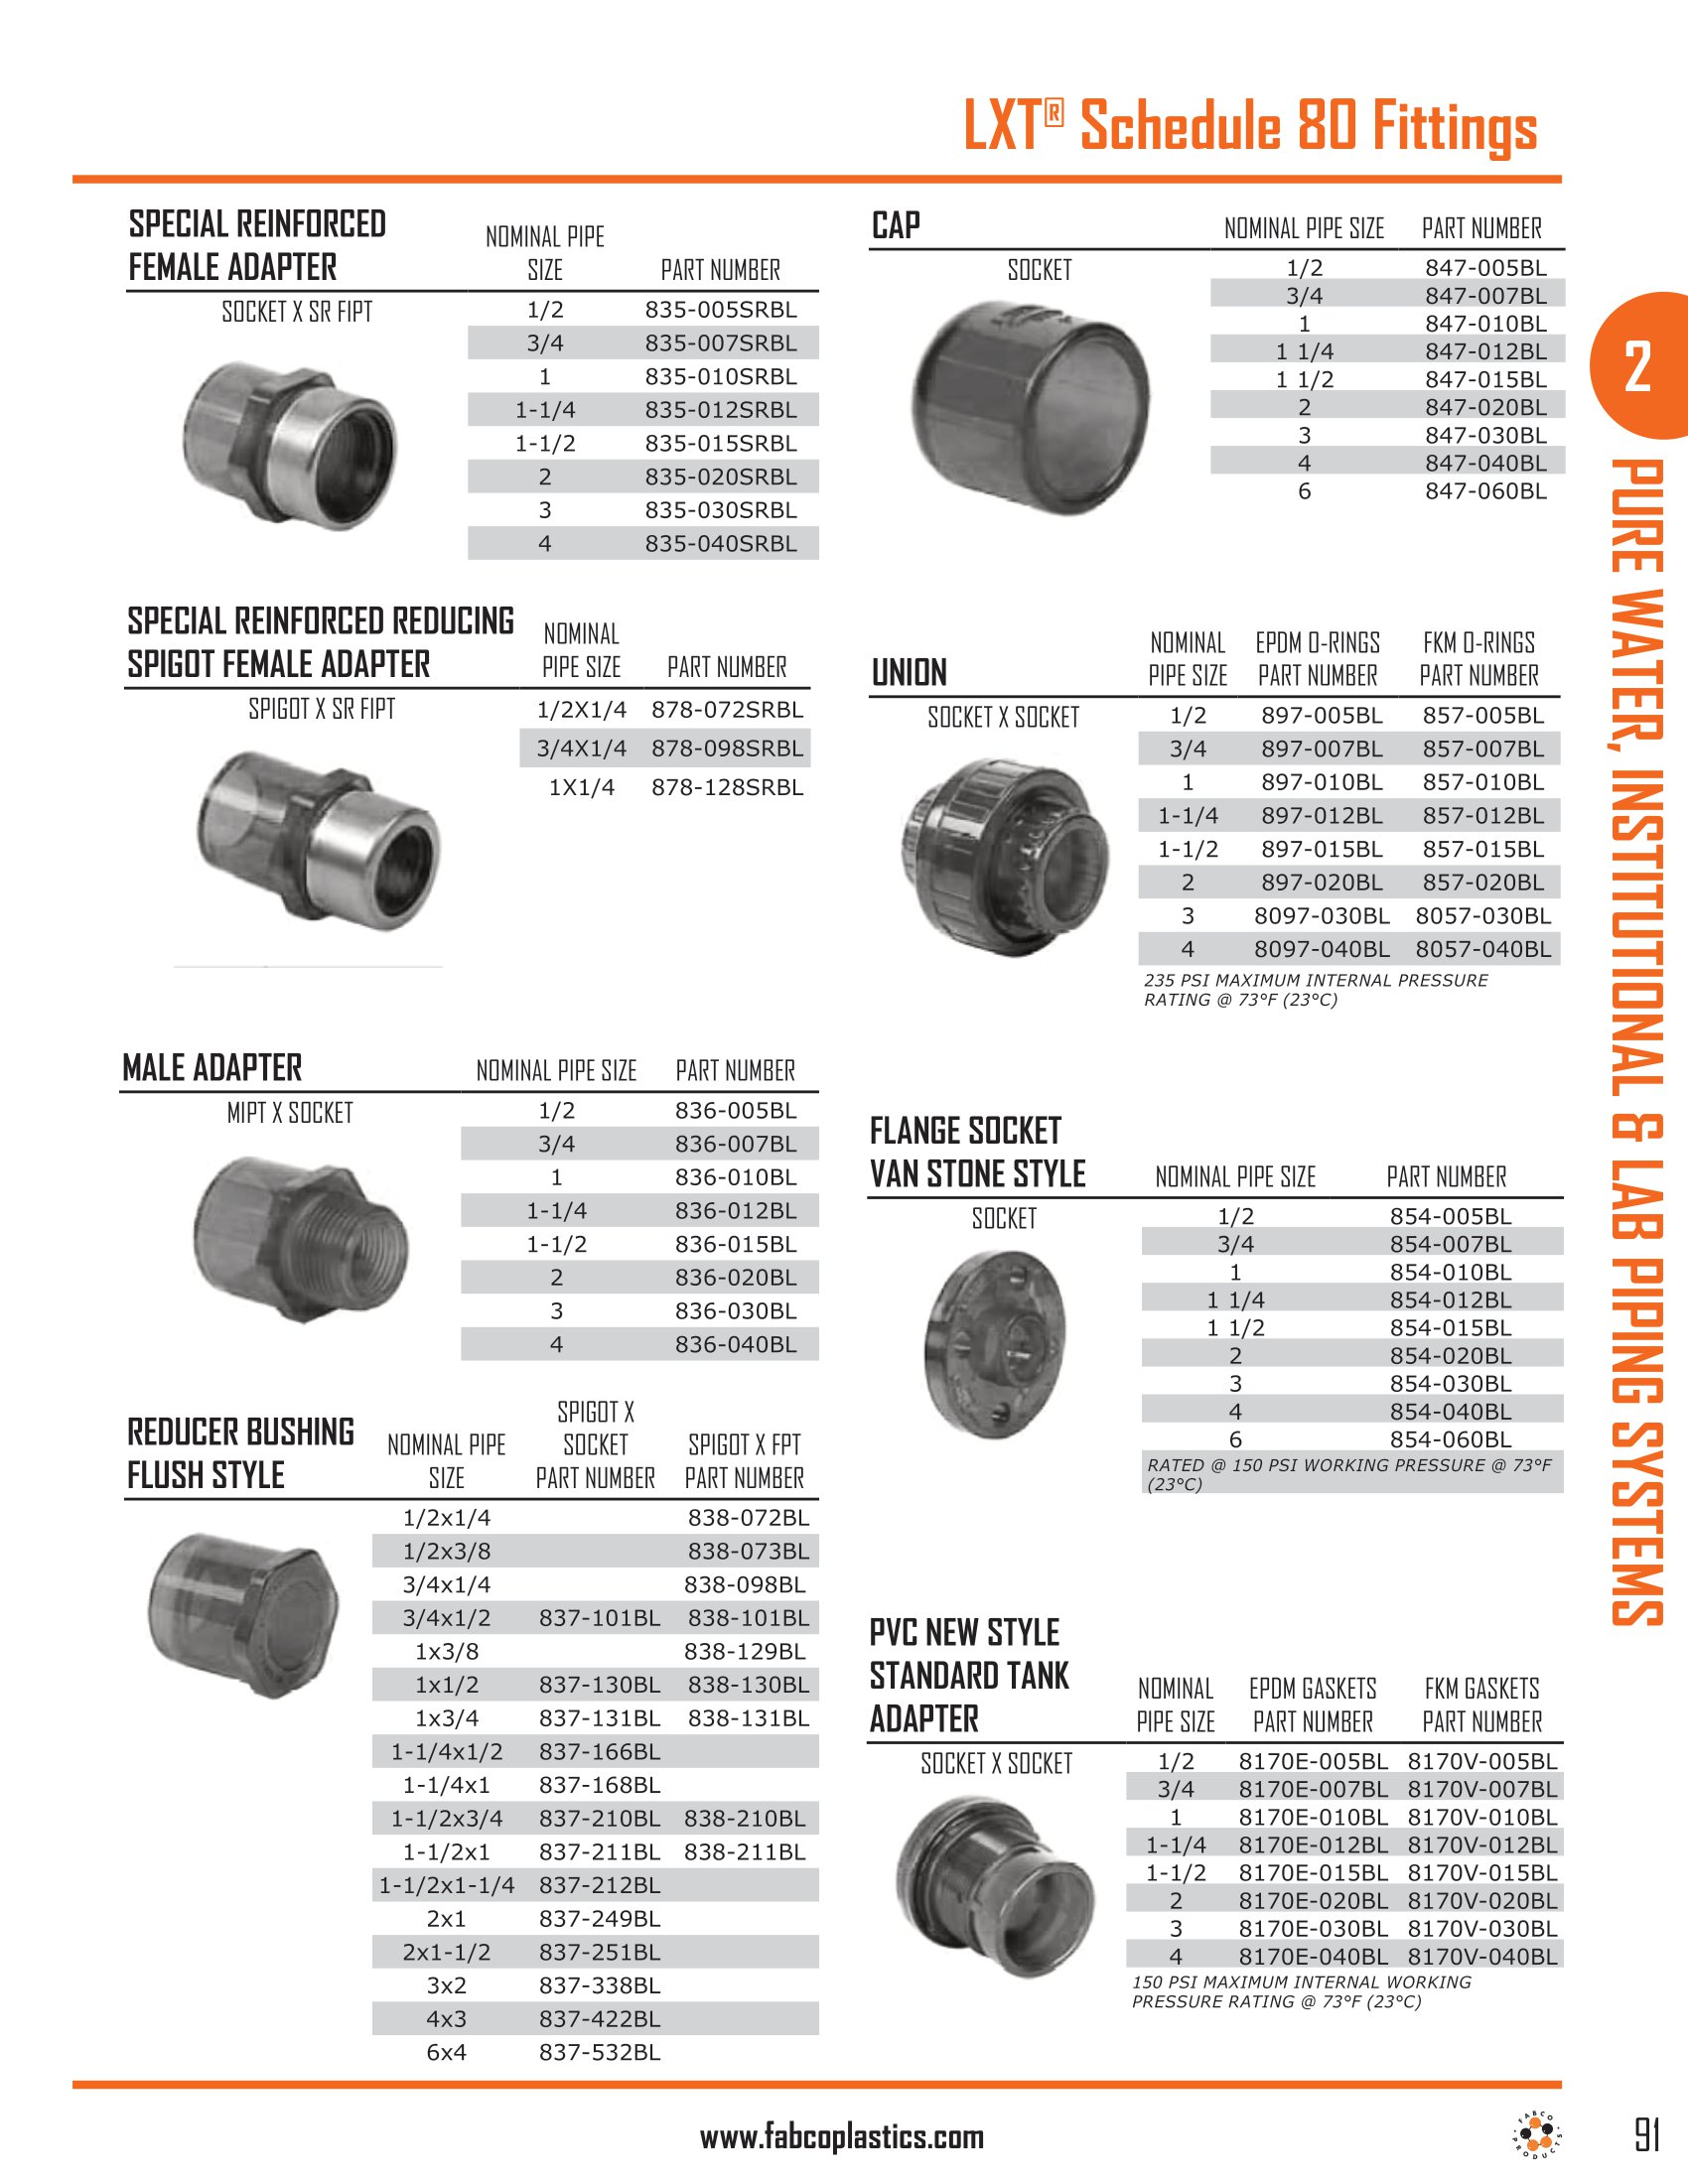 LXT Schedule 80 Piping Systems And Fittings